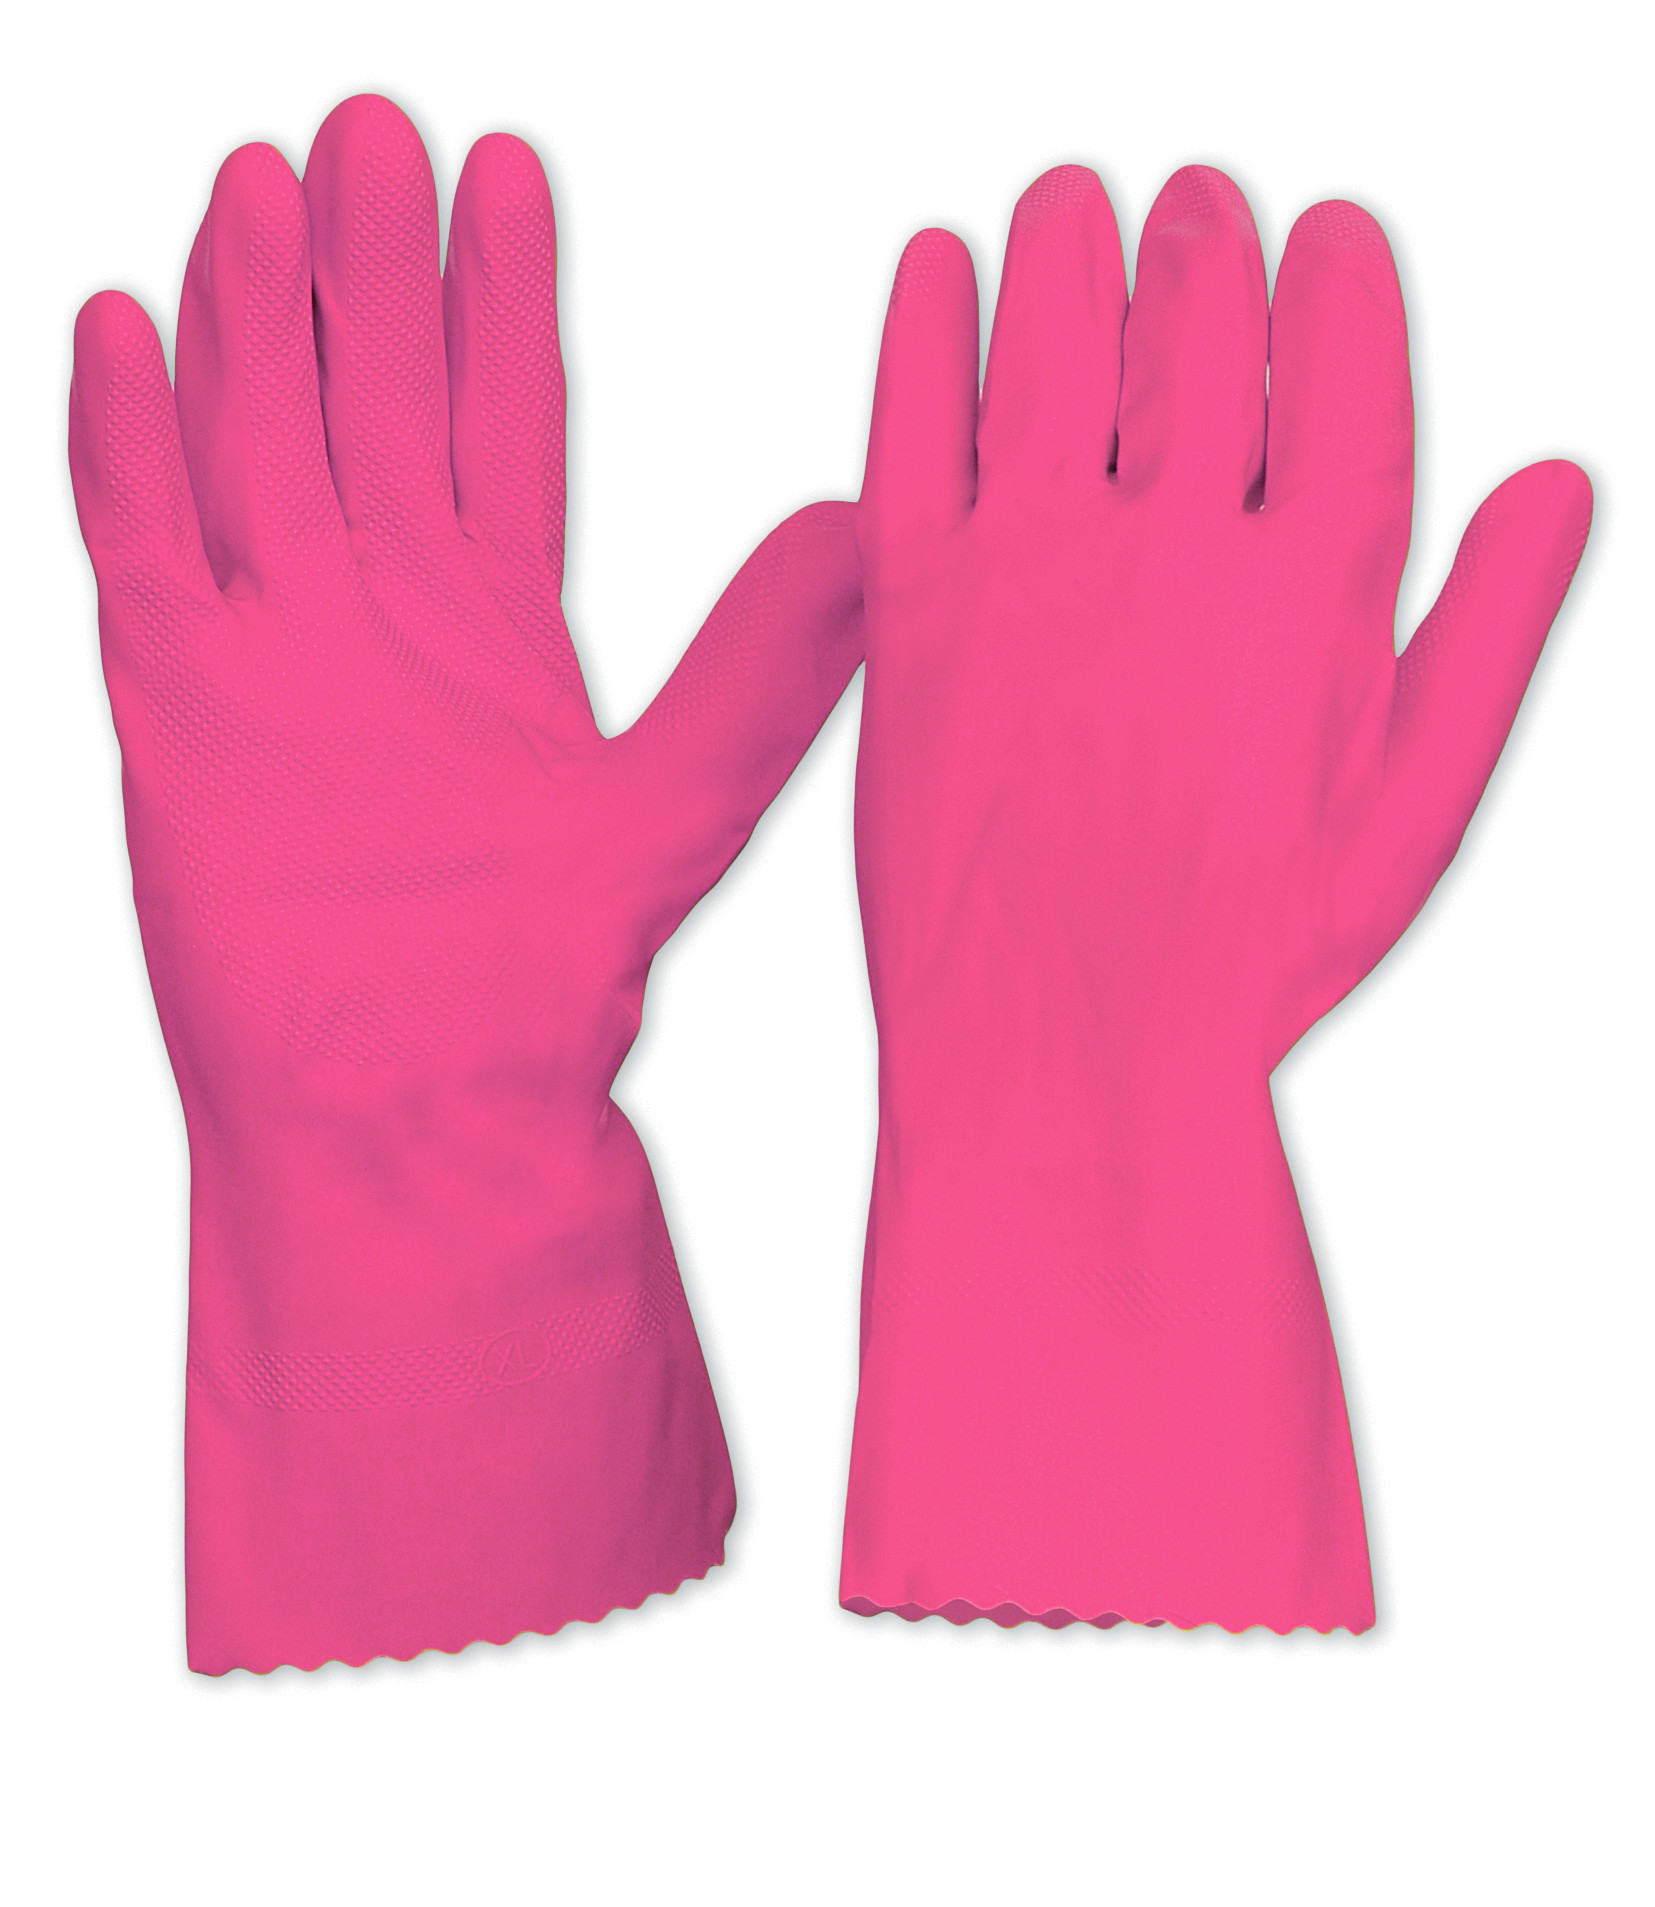 Premium Silverlined Rubber Gloves Pink Xxlarge Size 10 105 Rubber